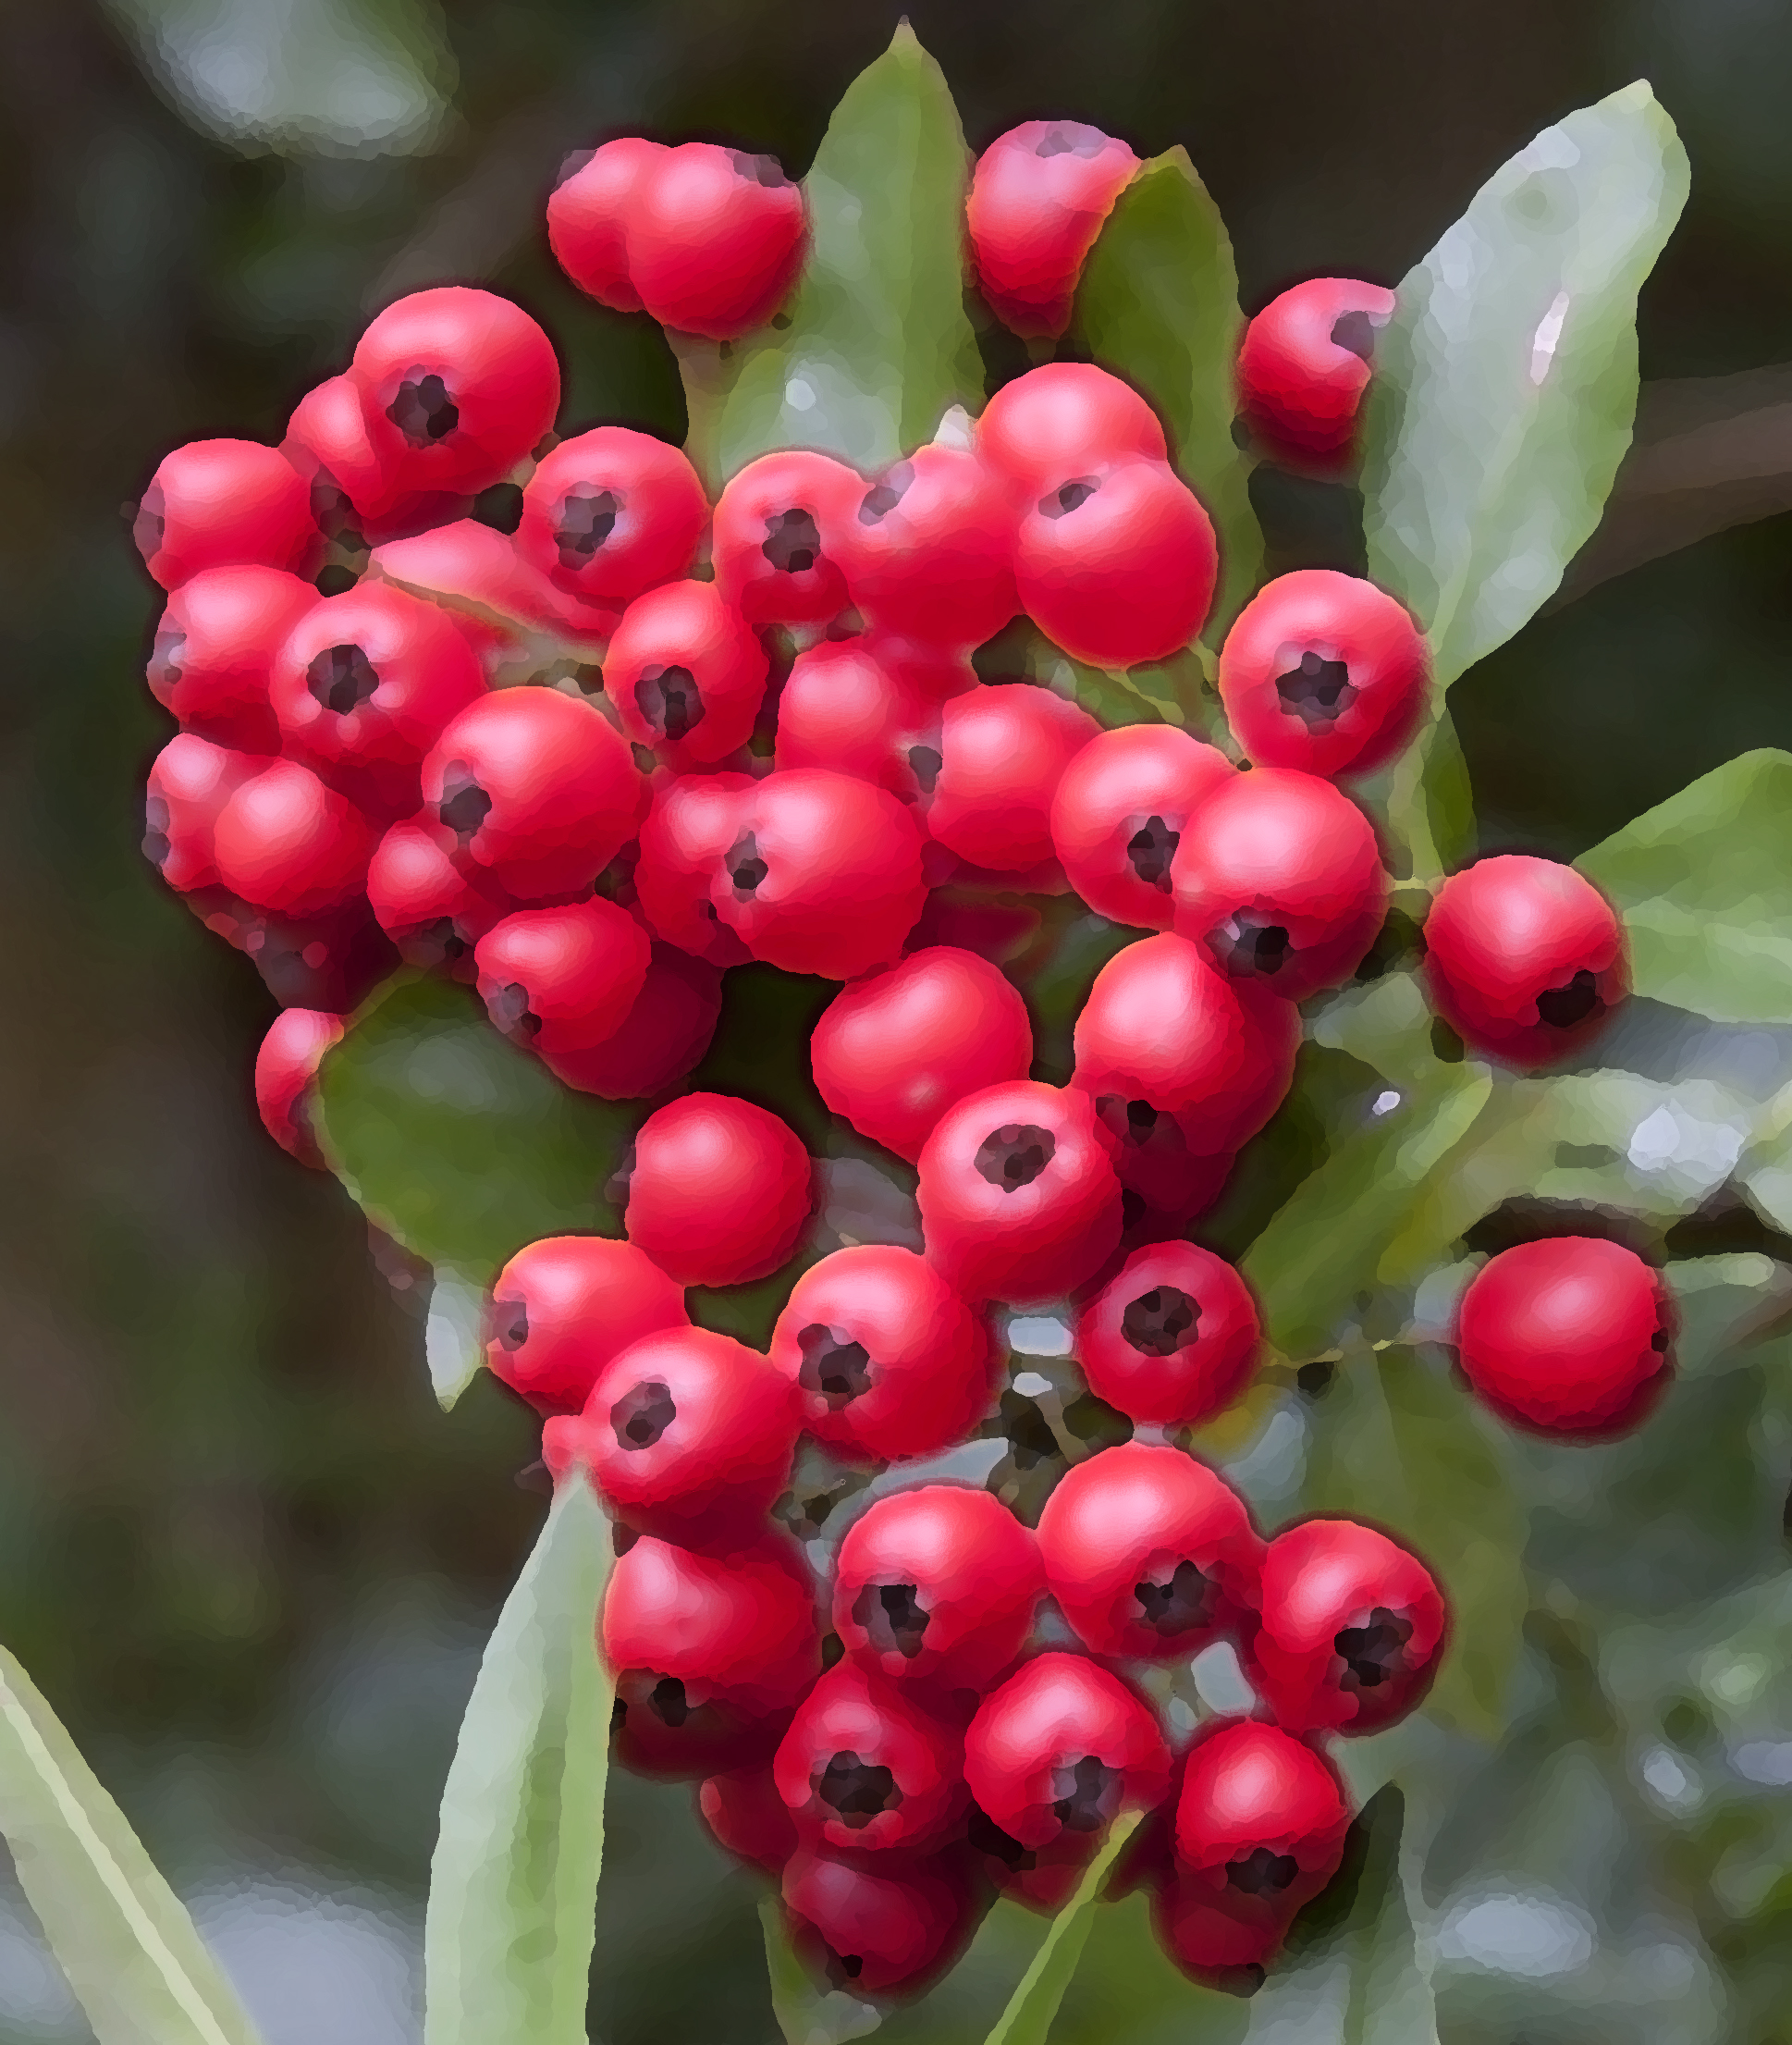 File:Altered Red Berries (4026495959).jpg - Wikimedia Commons